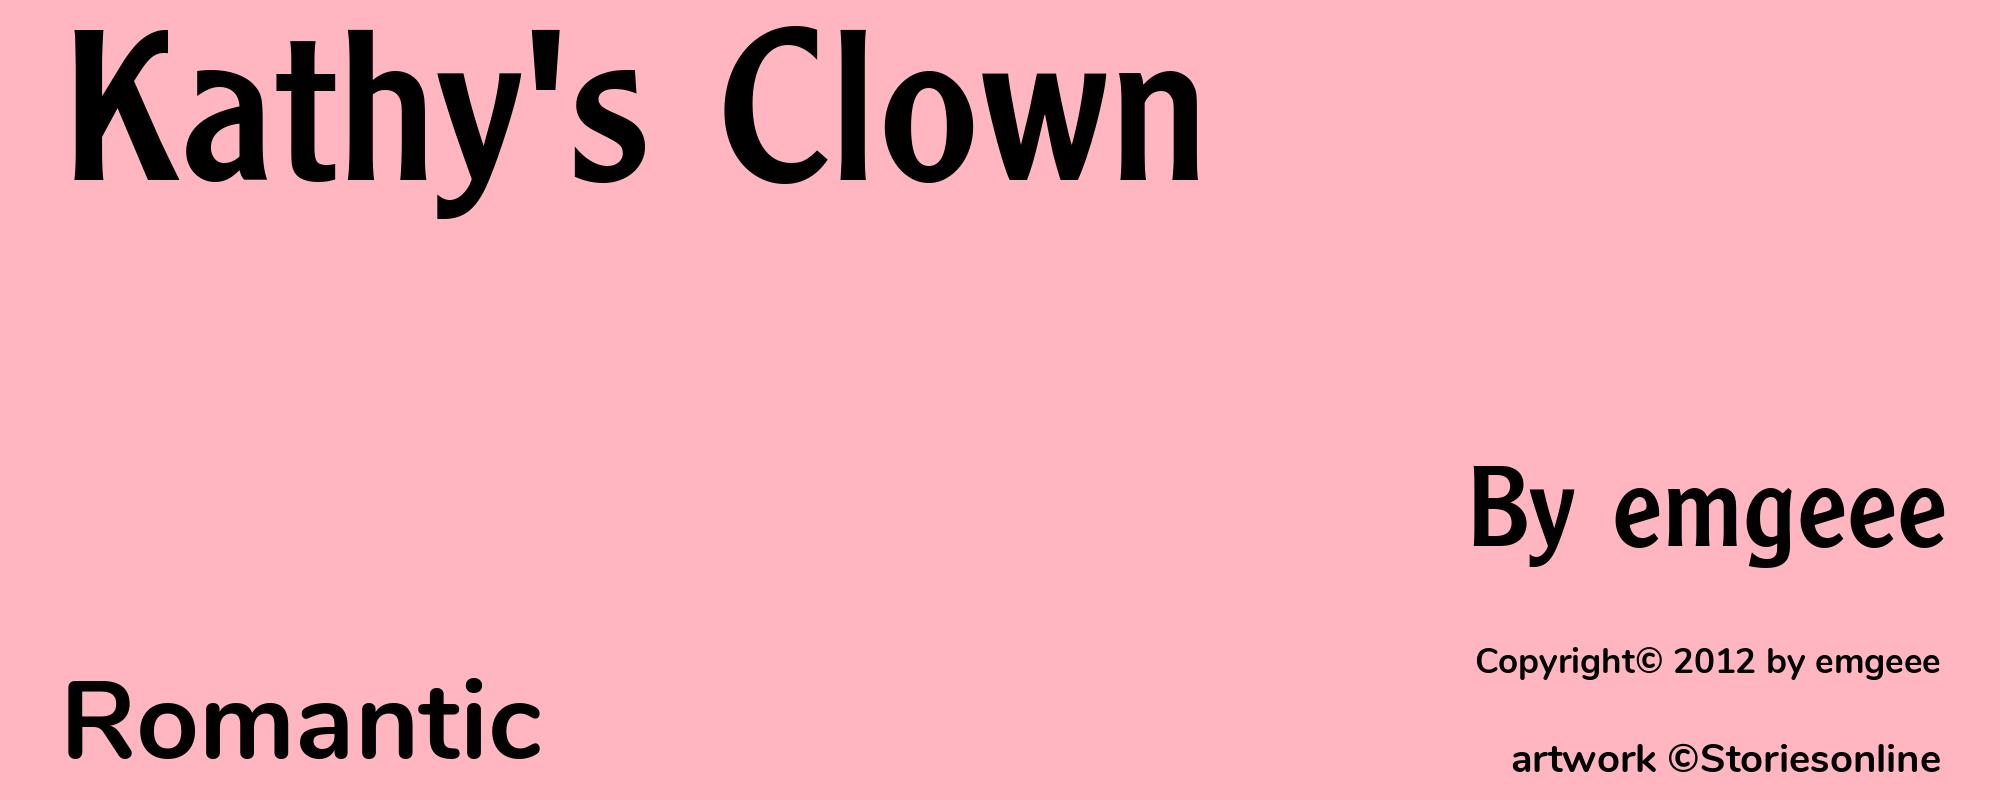 Kathy's Clown - Cover